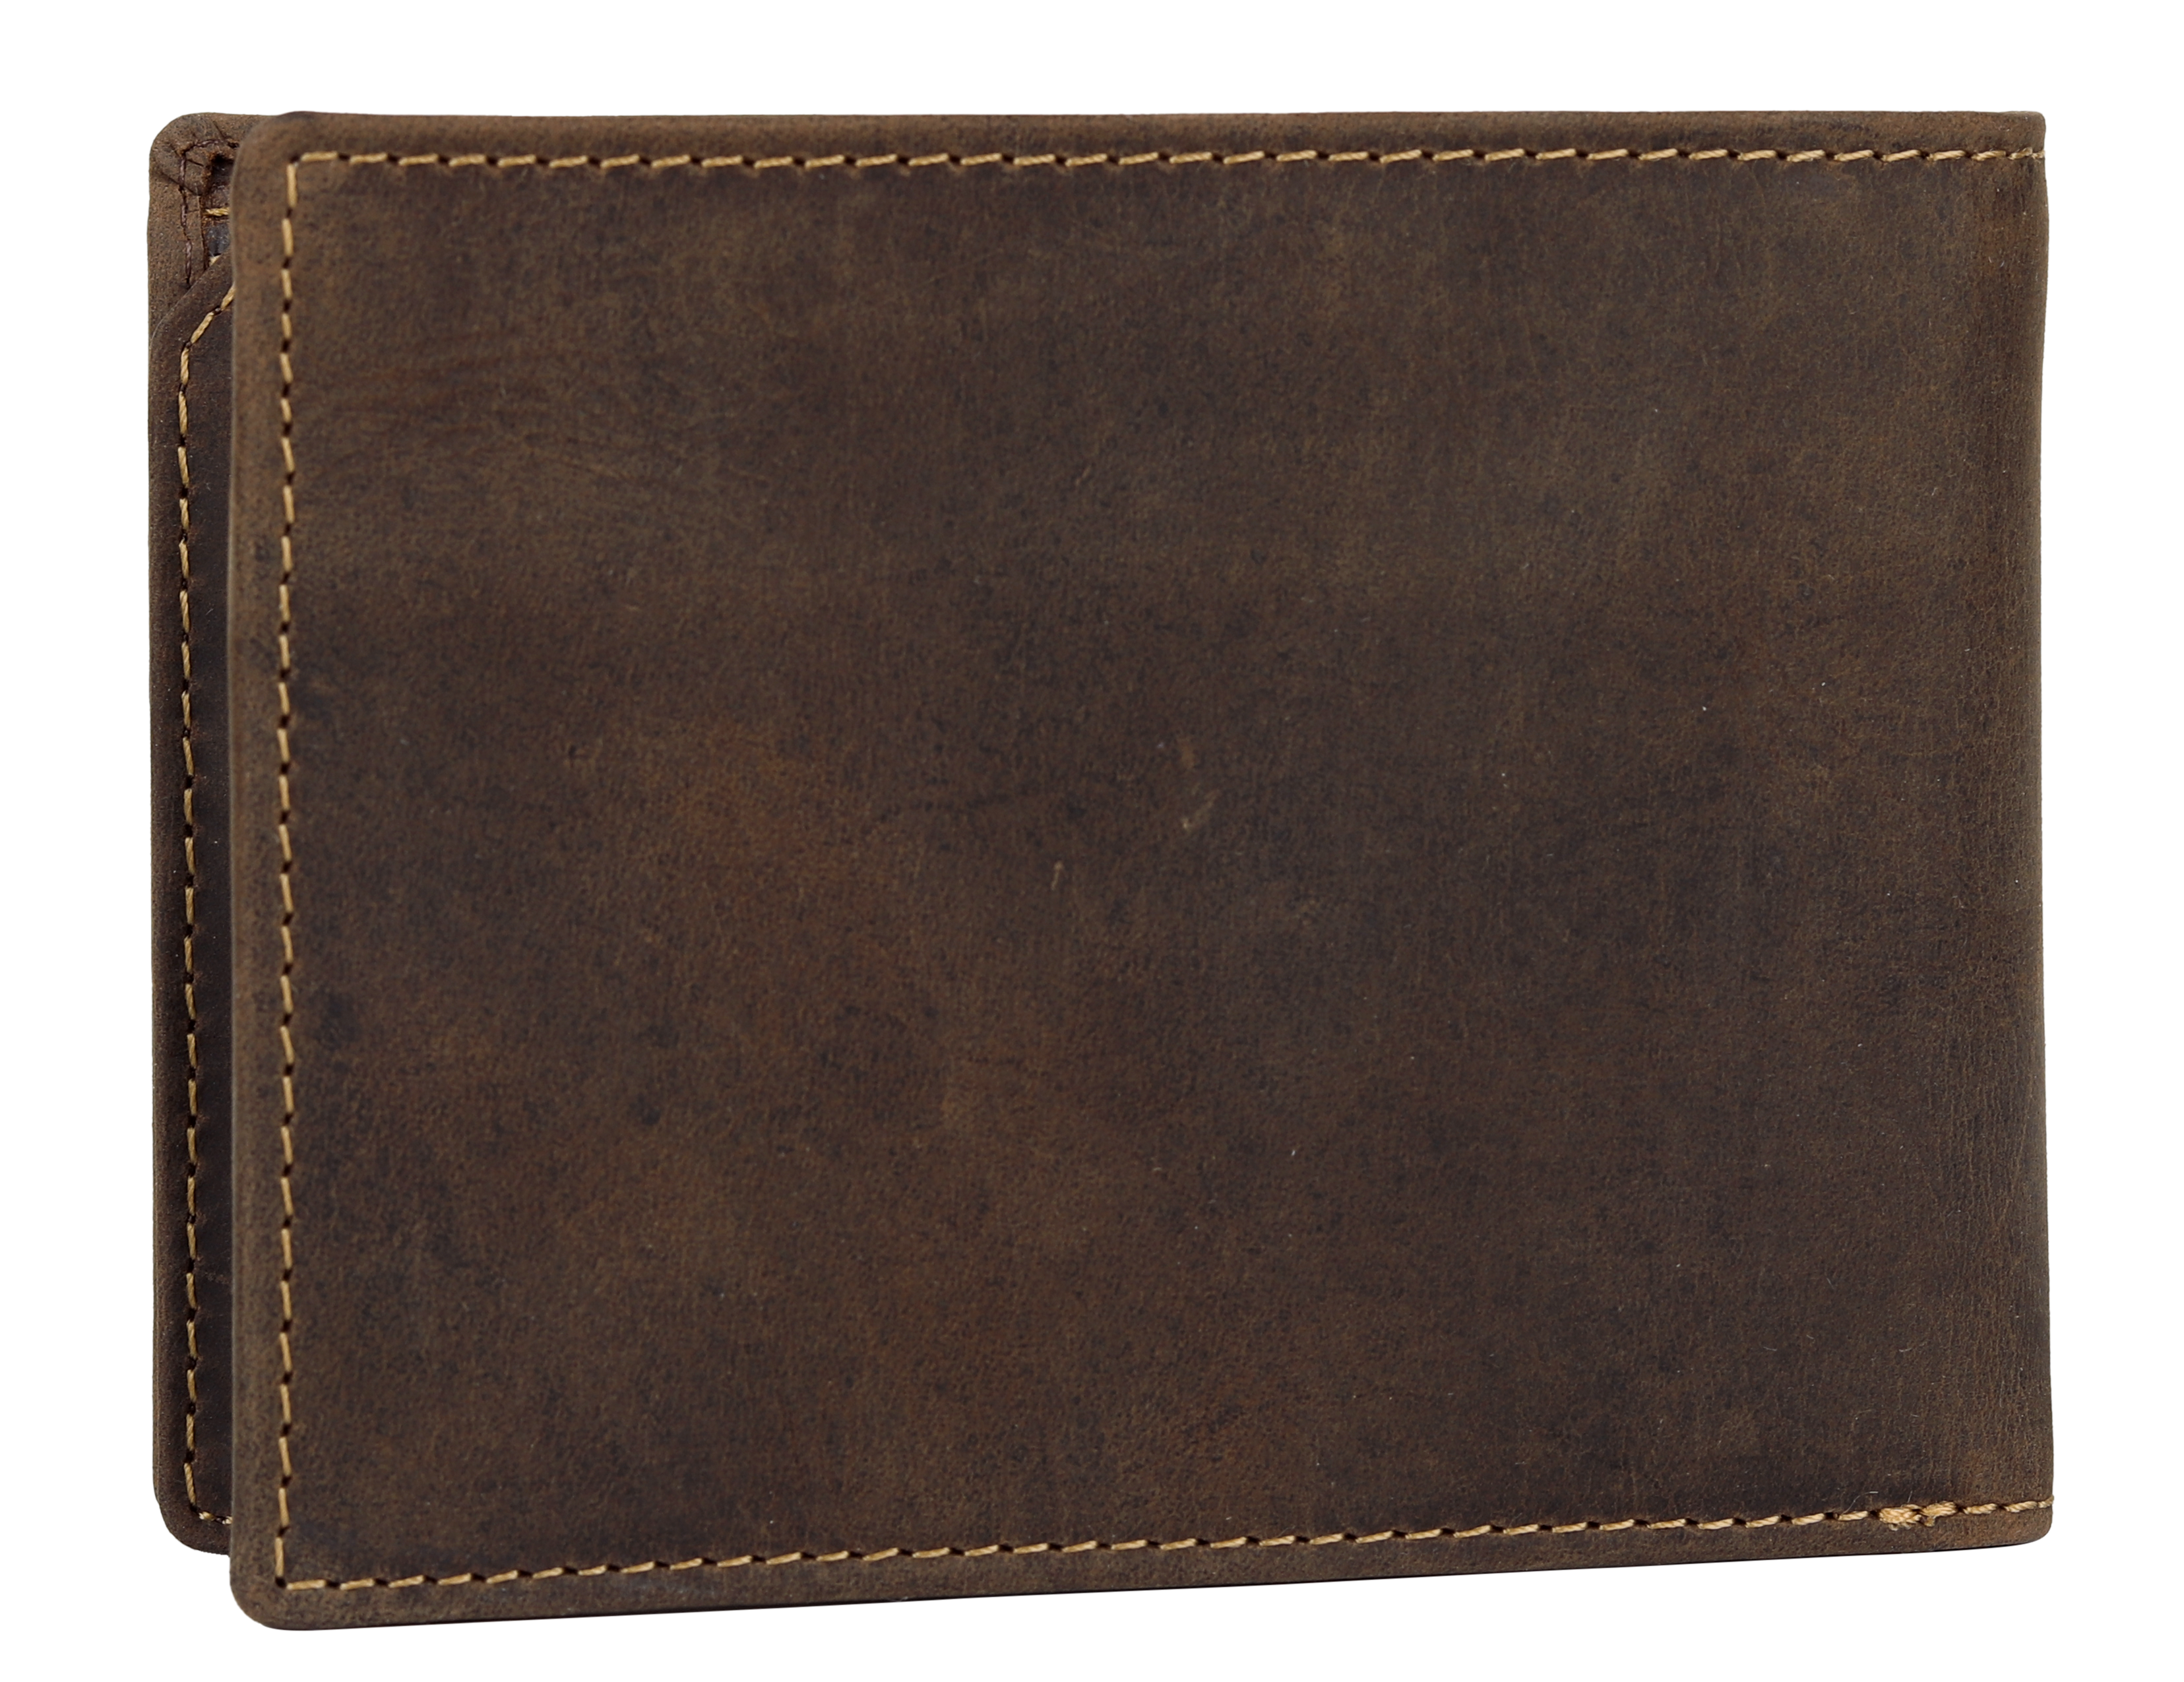 BOL/Open Road Men's Live To Ride Distressed Leather Wallet